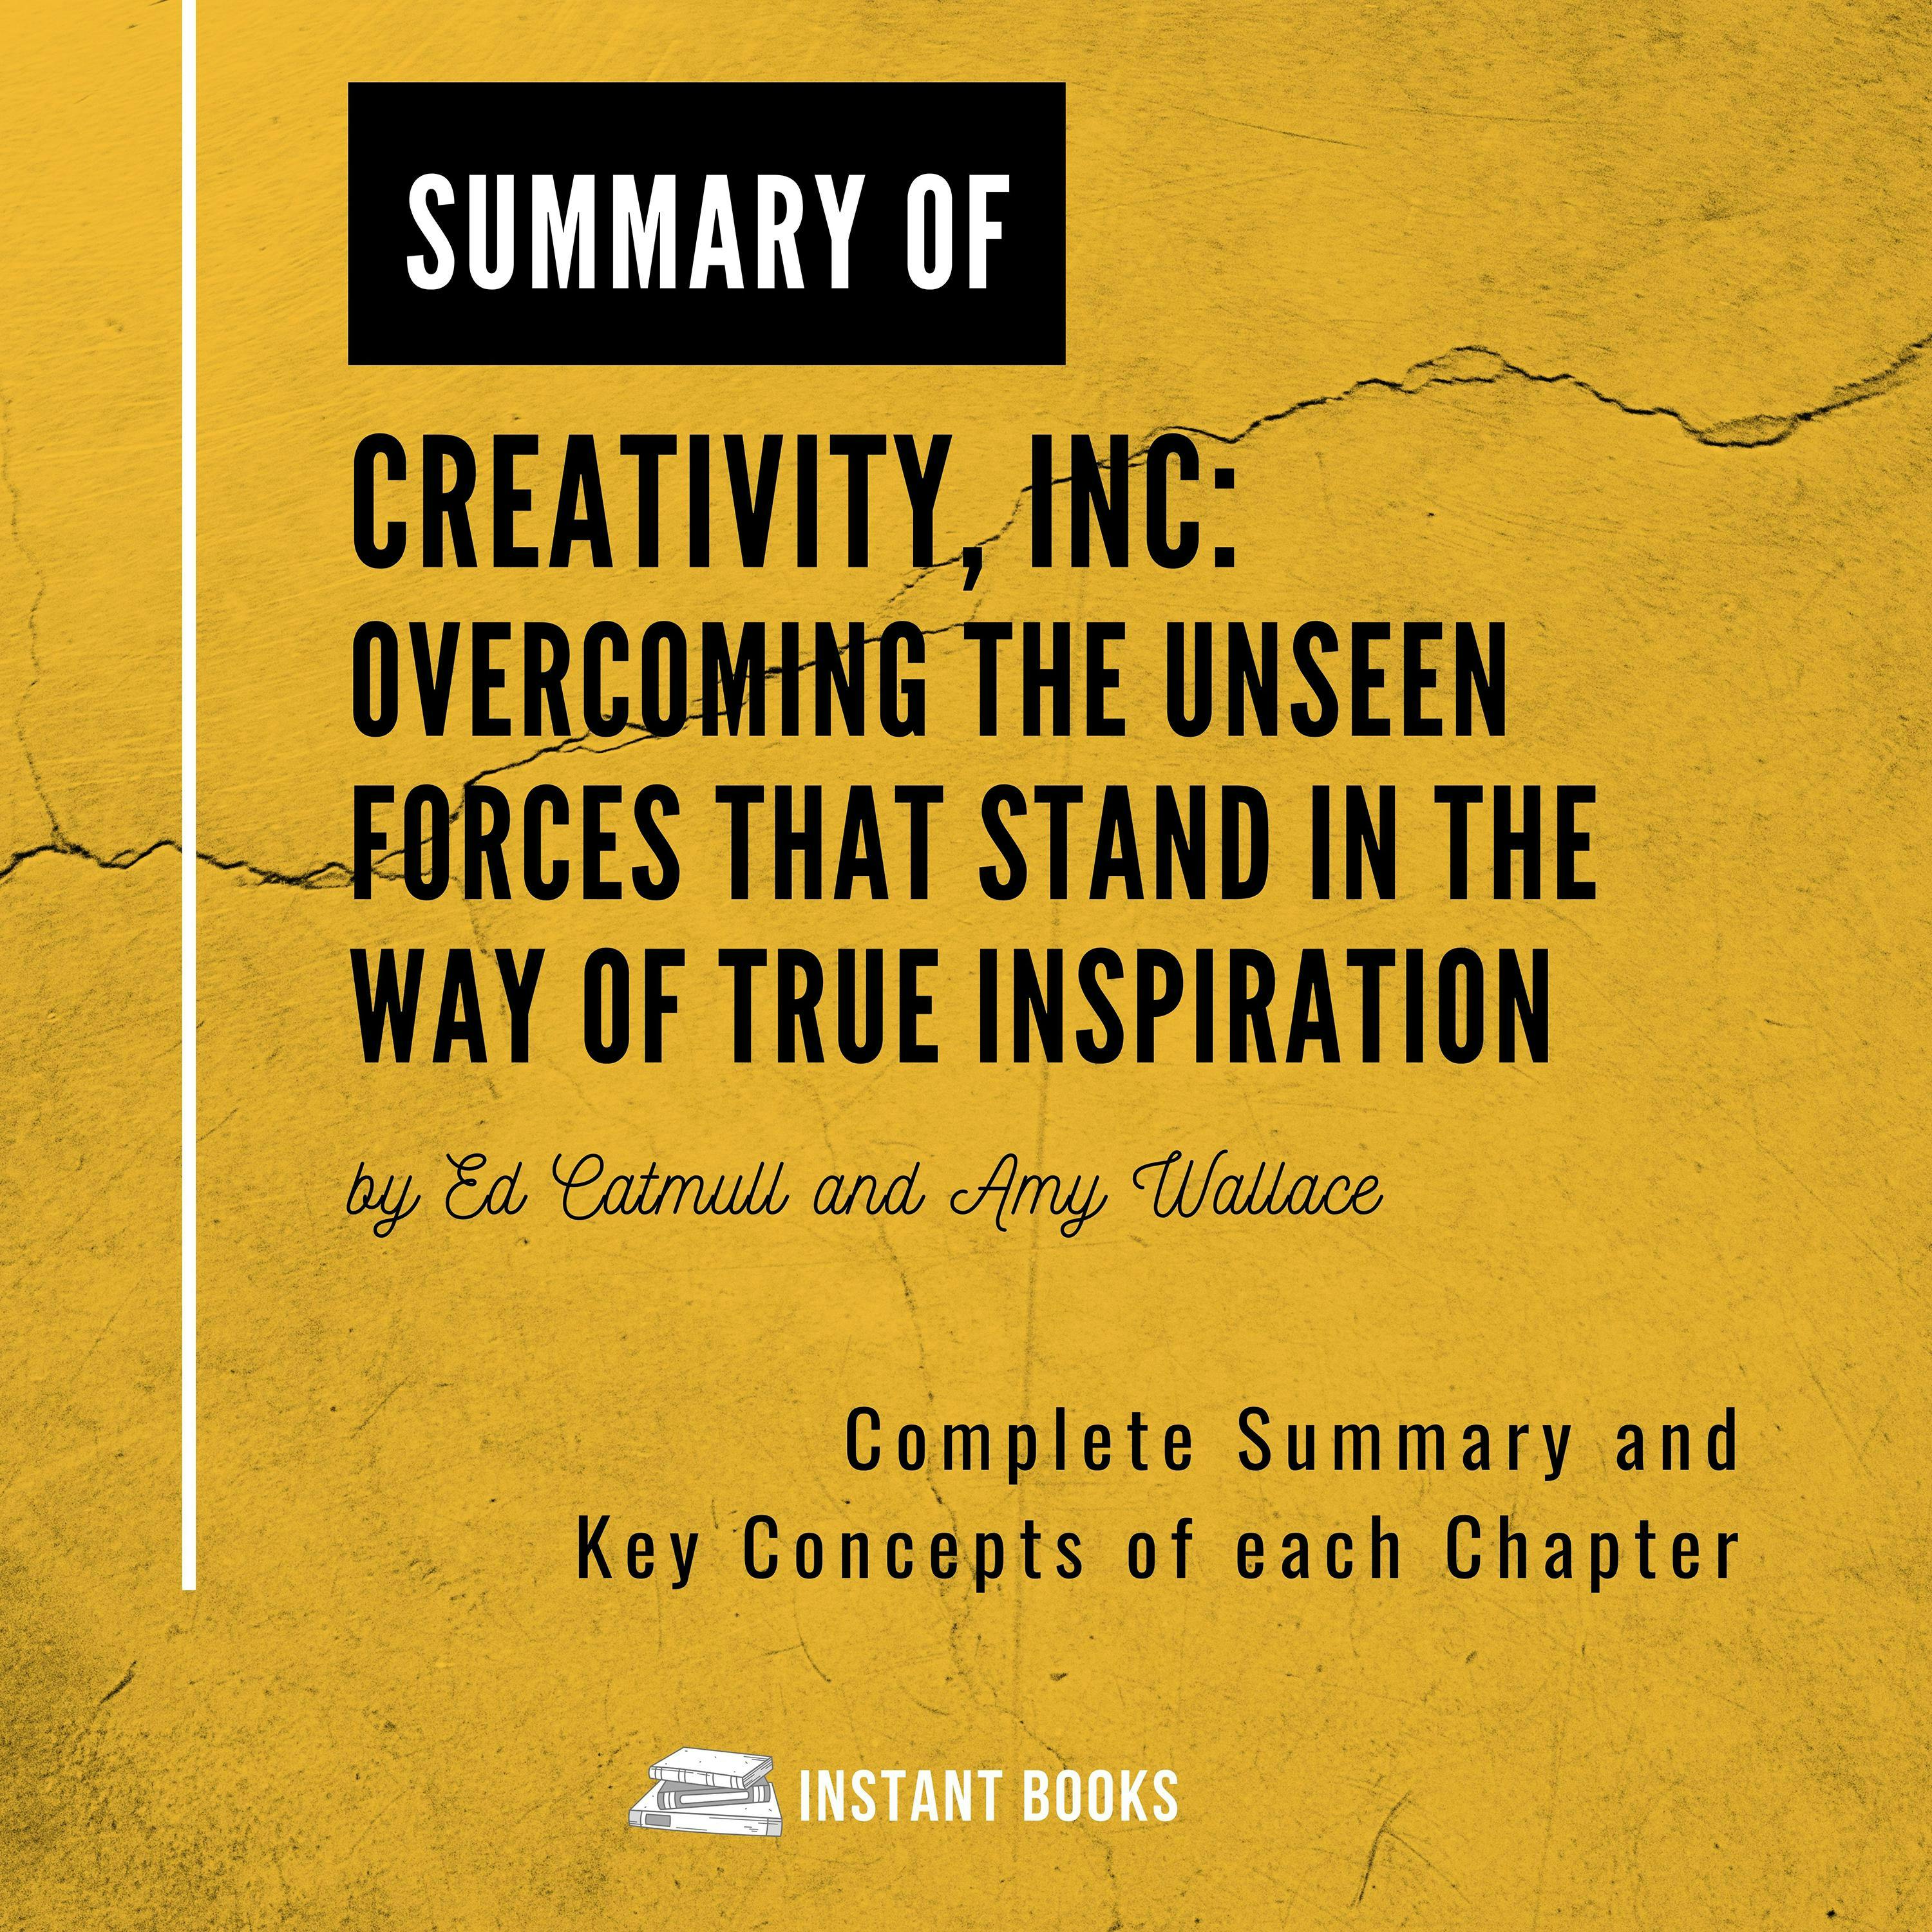 Summary of Creativity, Inc: Overcoming the Unseen Forces That Stand in the Way of True Inspiration by Ed Catmull and Amy Wallace: Complete Summary and Key Concepts of each Chapter - Istant Books